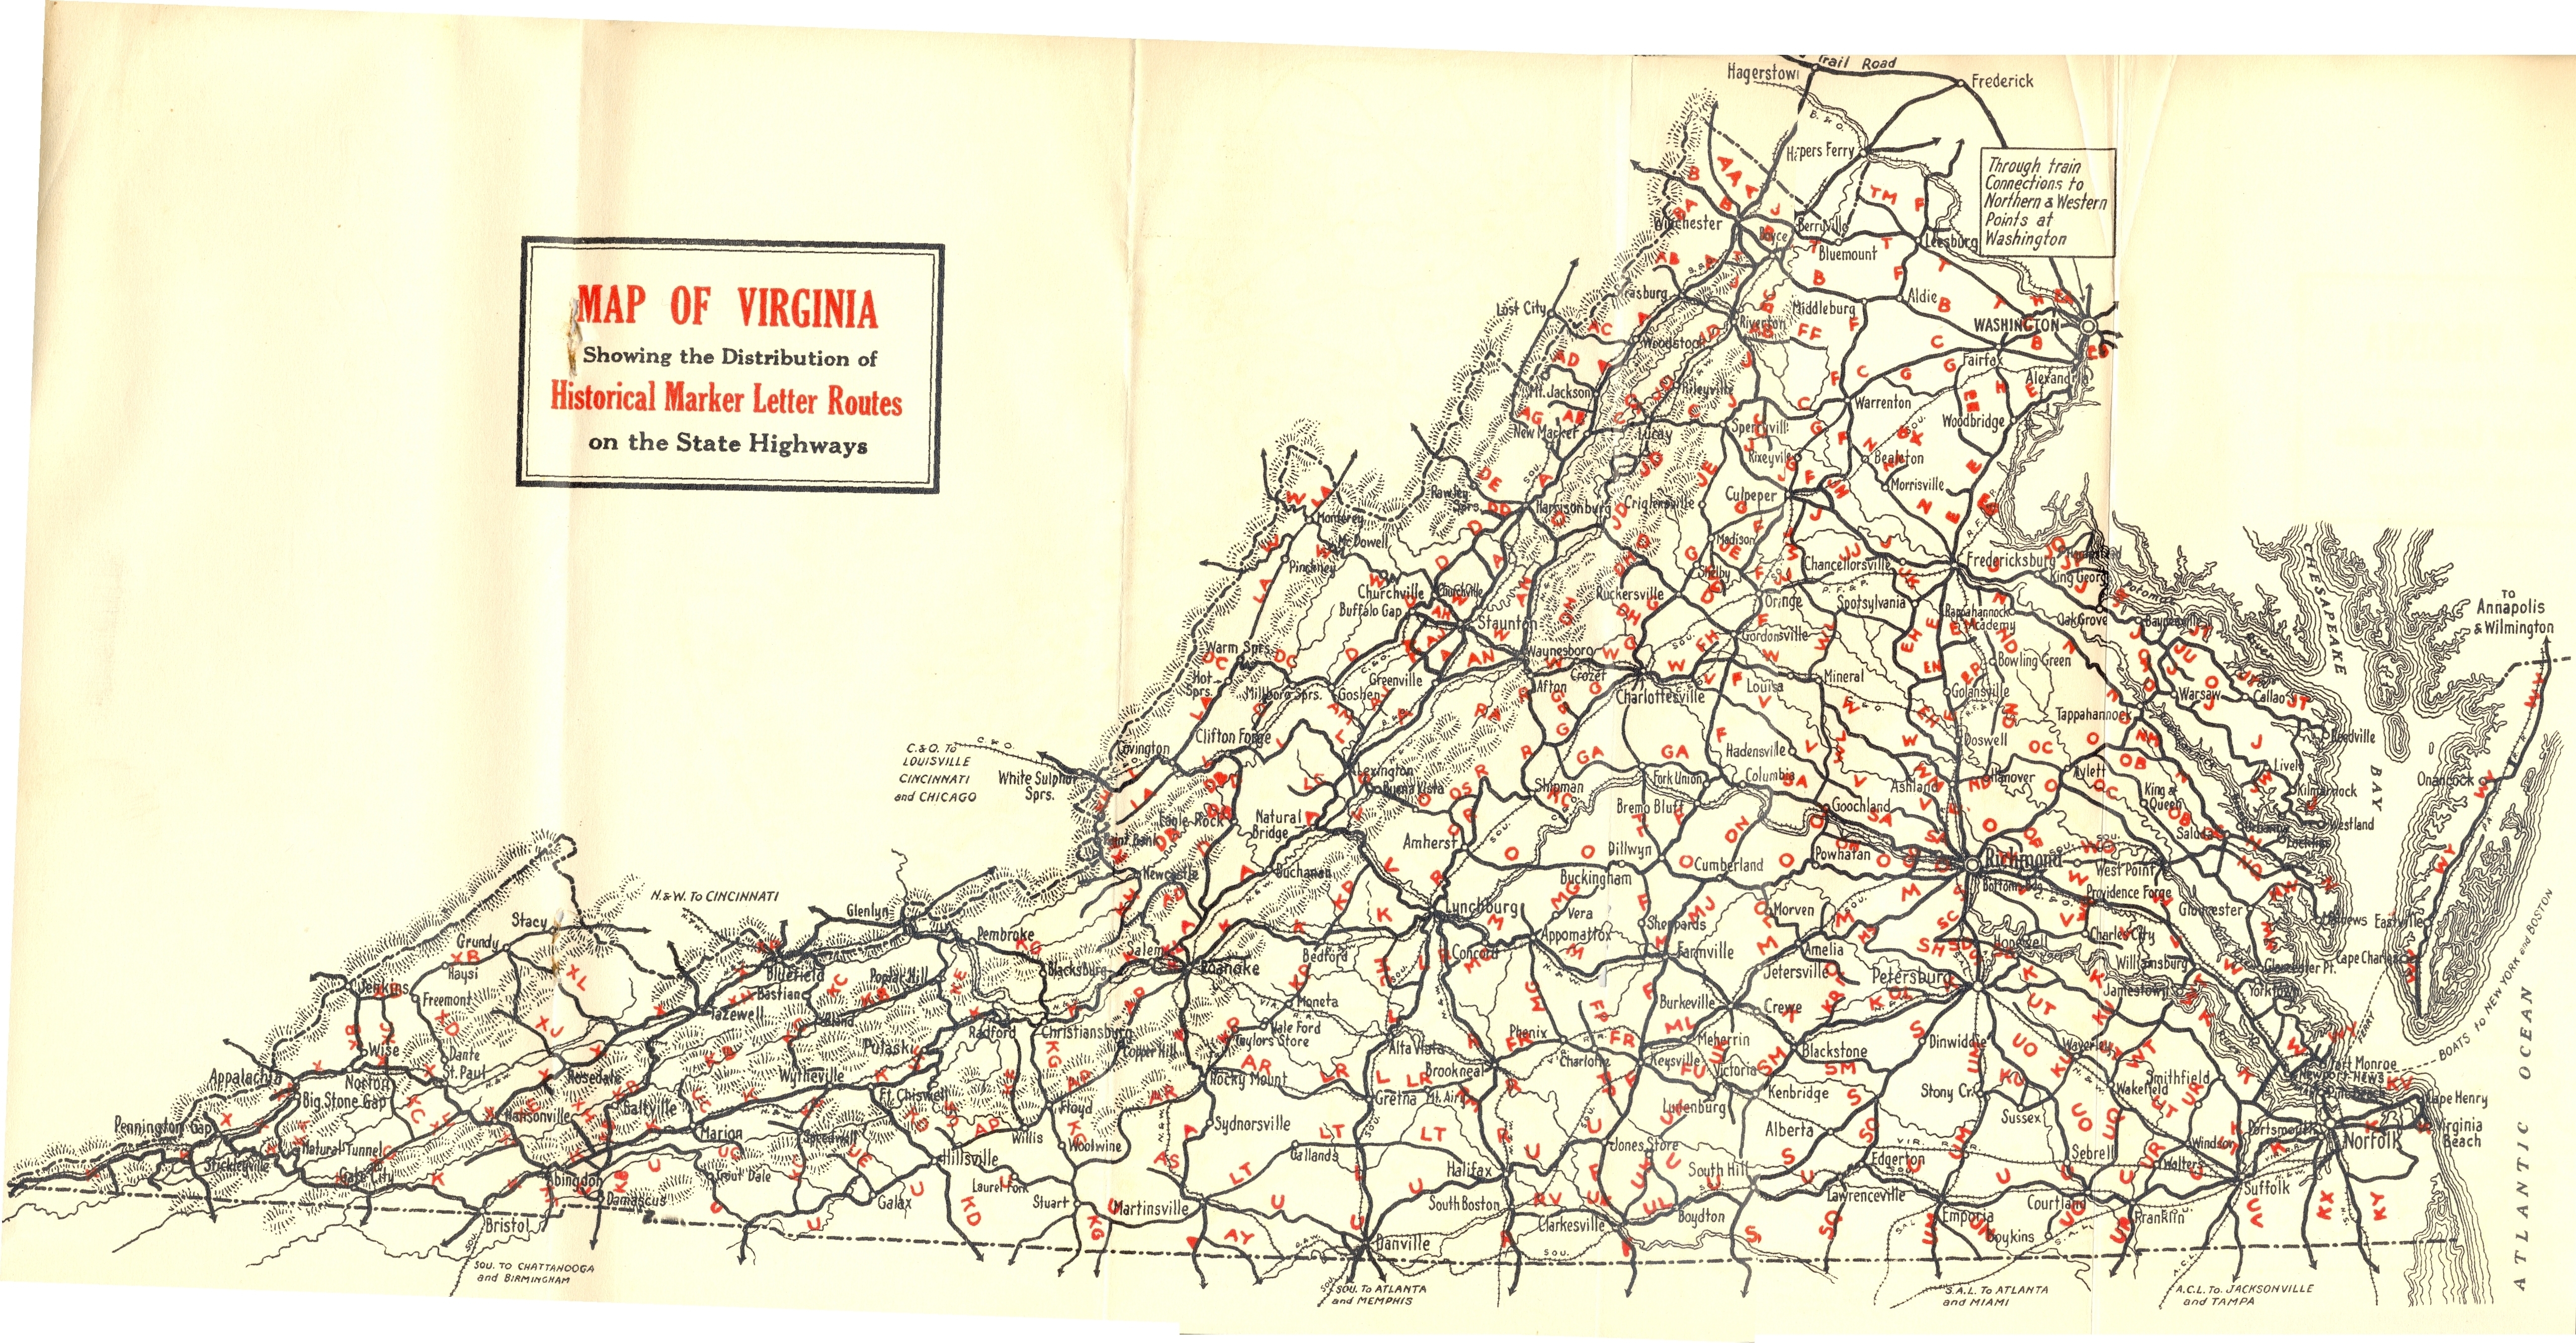 1932 Virginia Historical Marker Letter Routes